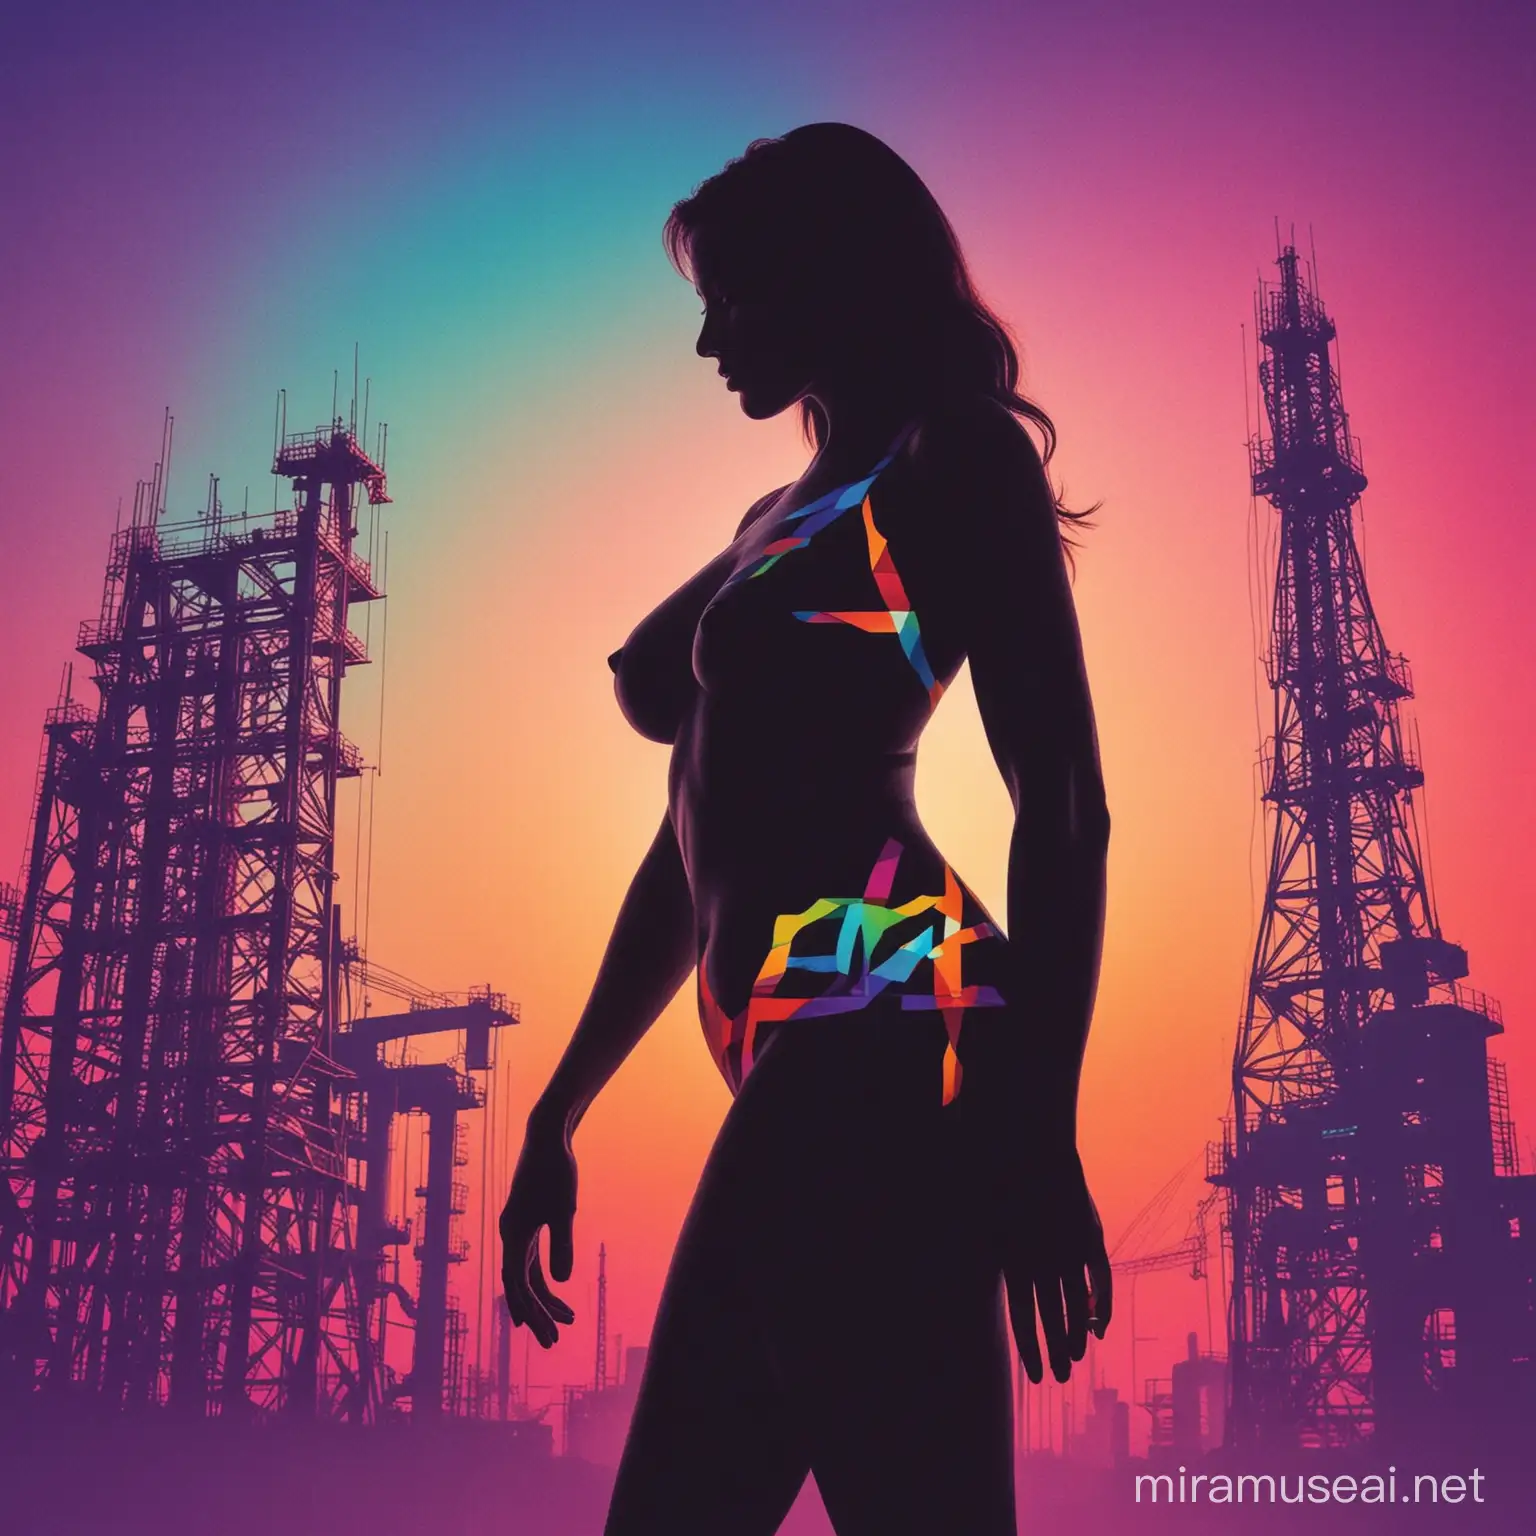 We really like the woman's body silhouette and the critical infrastructure in the colorful background. We would prefer it to be more traditional looking looking logo with tag line ATOSSA GROUP